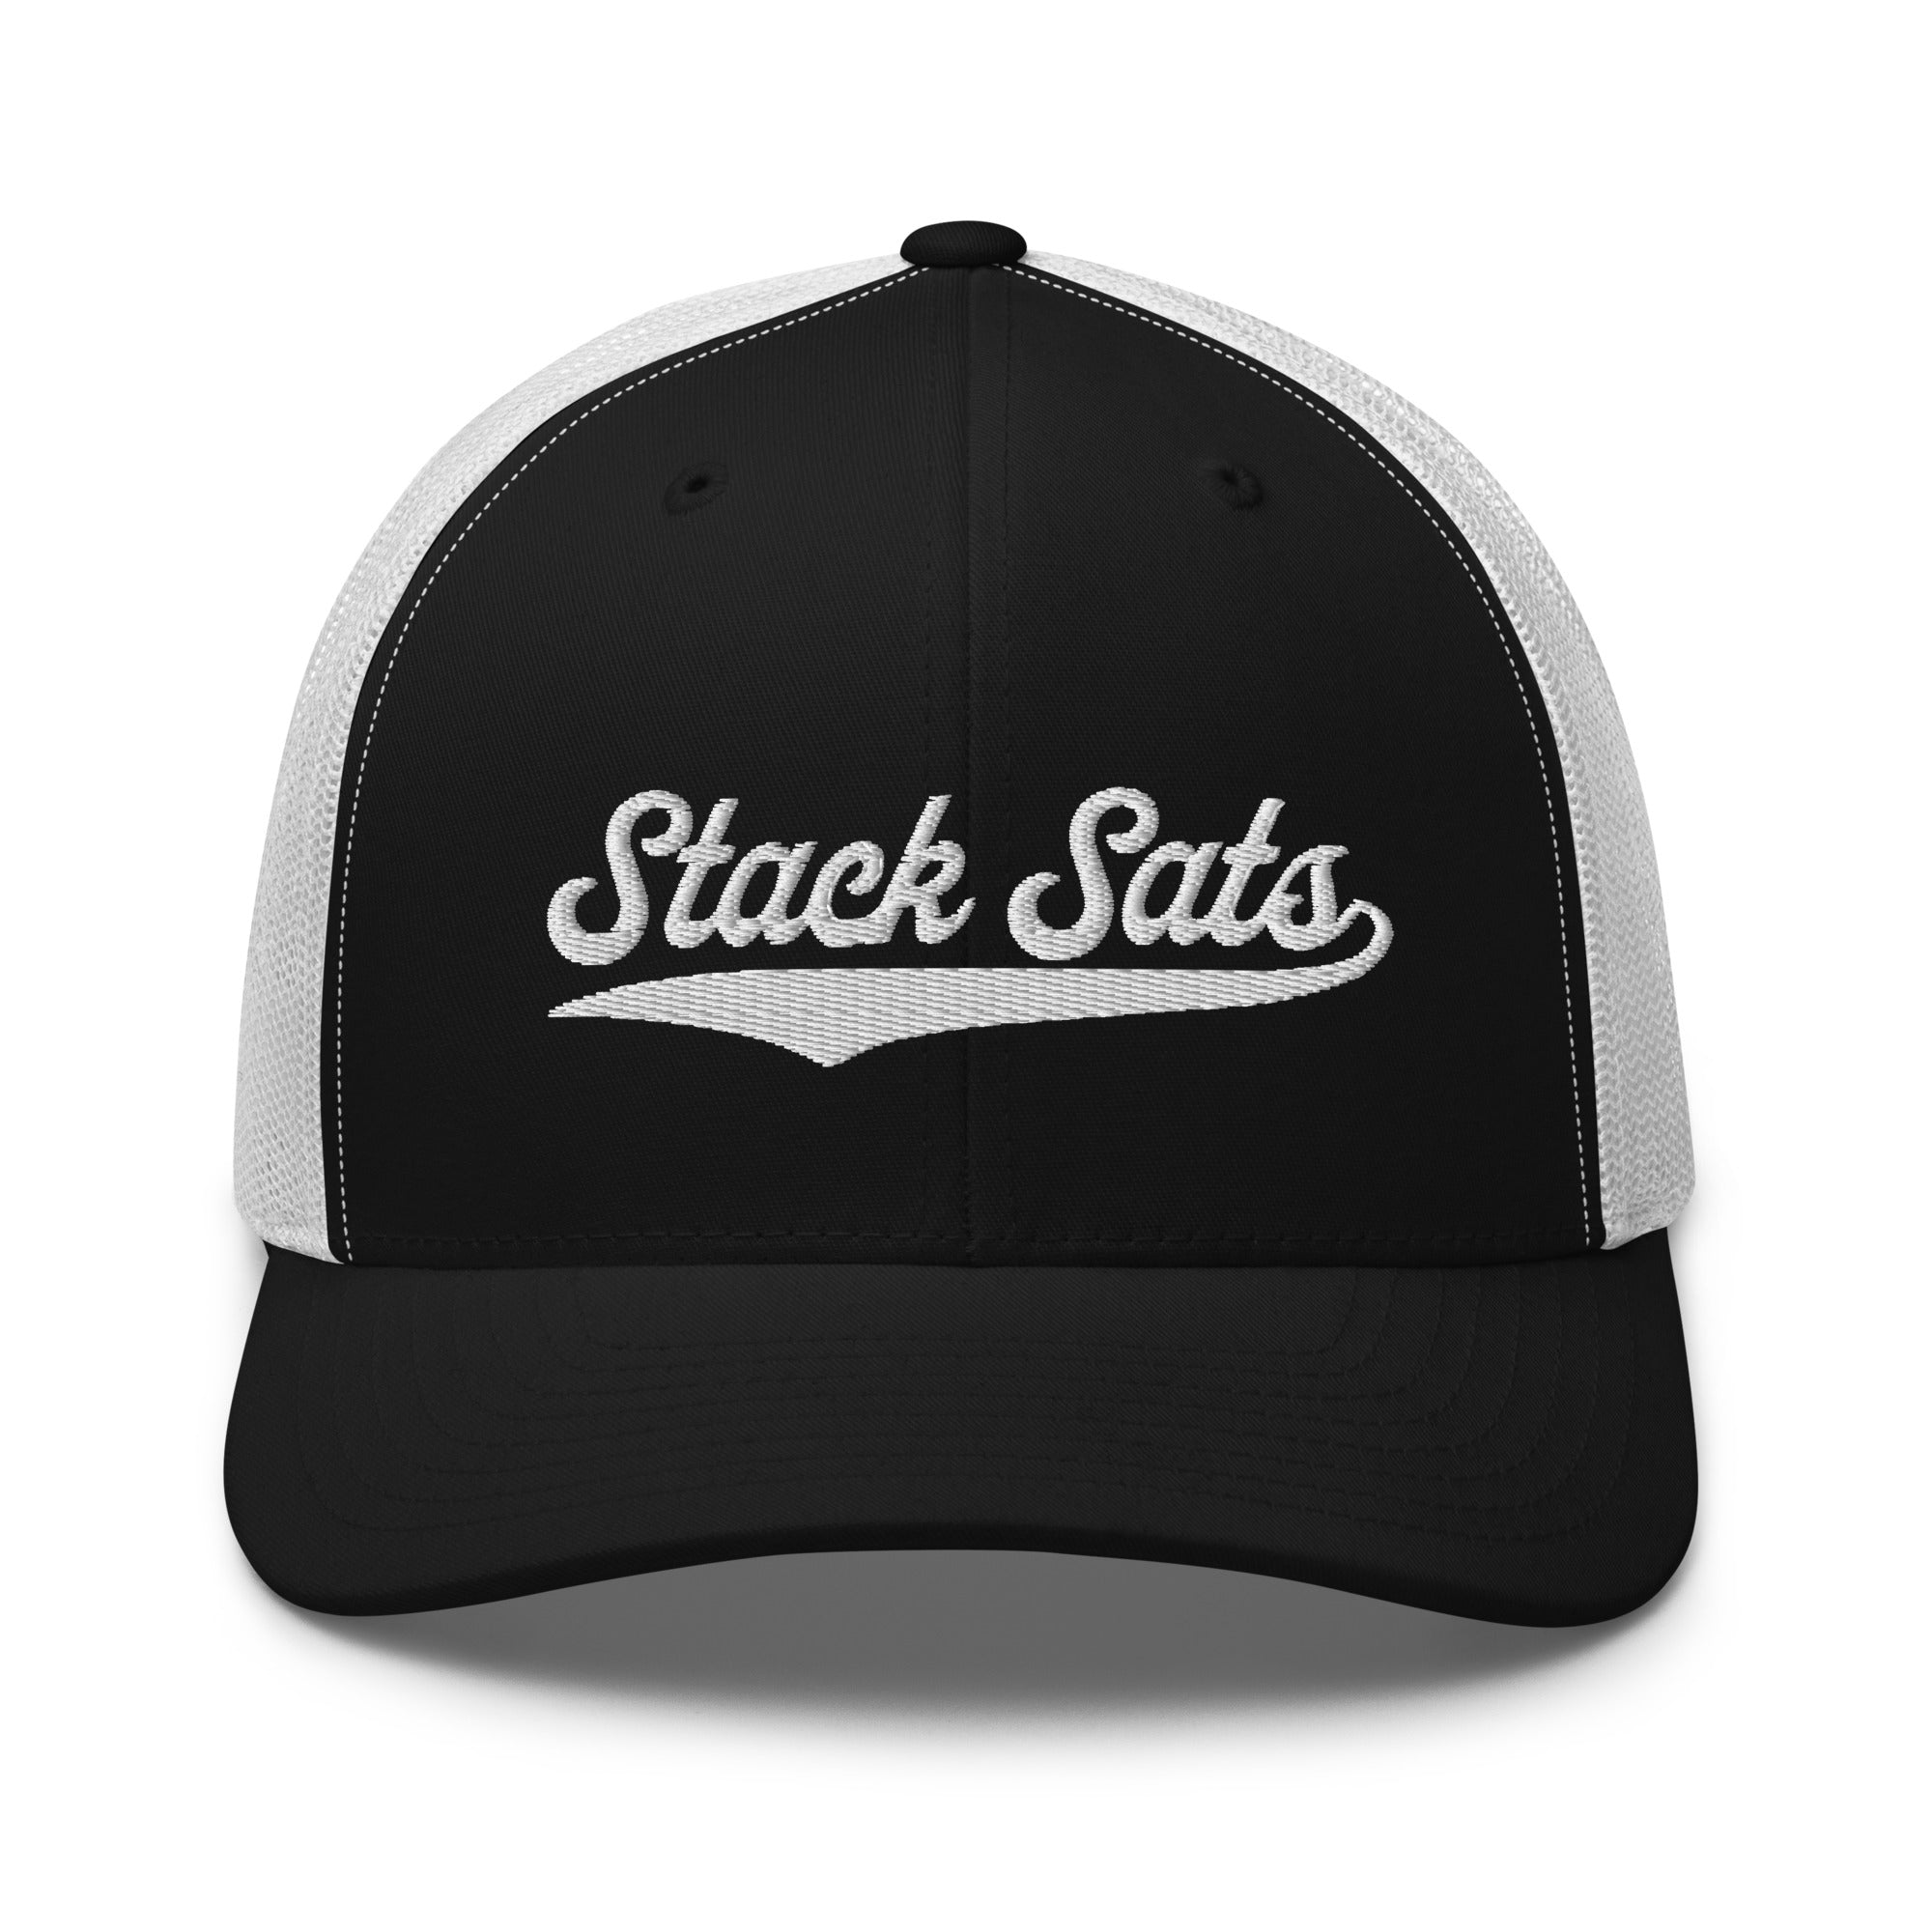 Bitcoin Headwear - The Stack Sats Trucker Hat features a bold script logo. Color: Black and white. Front view.